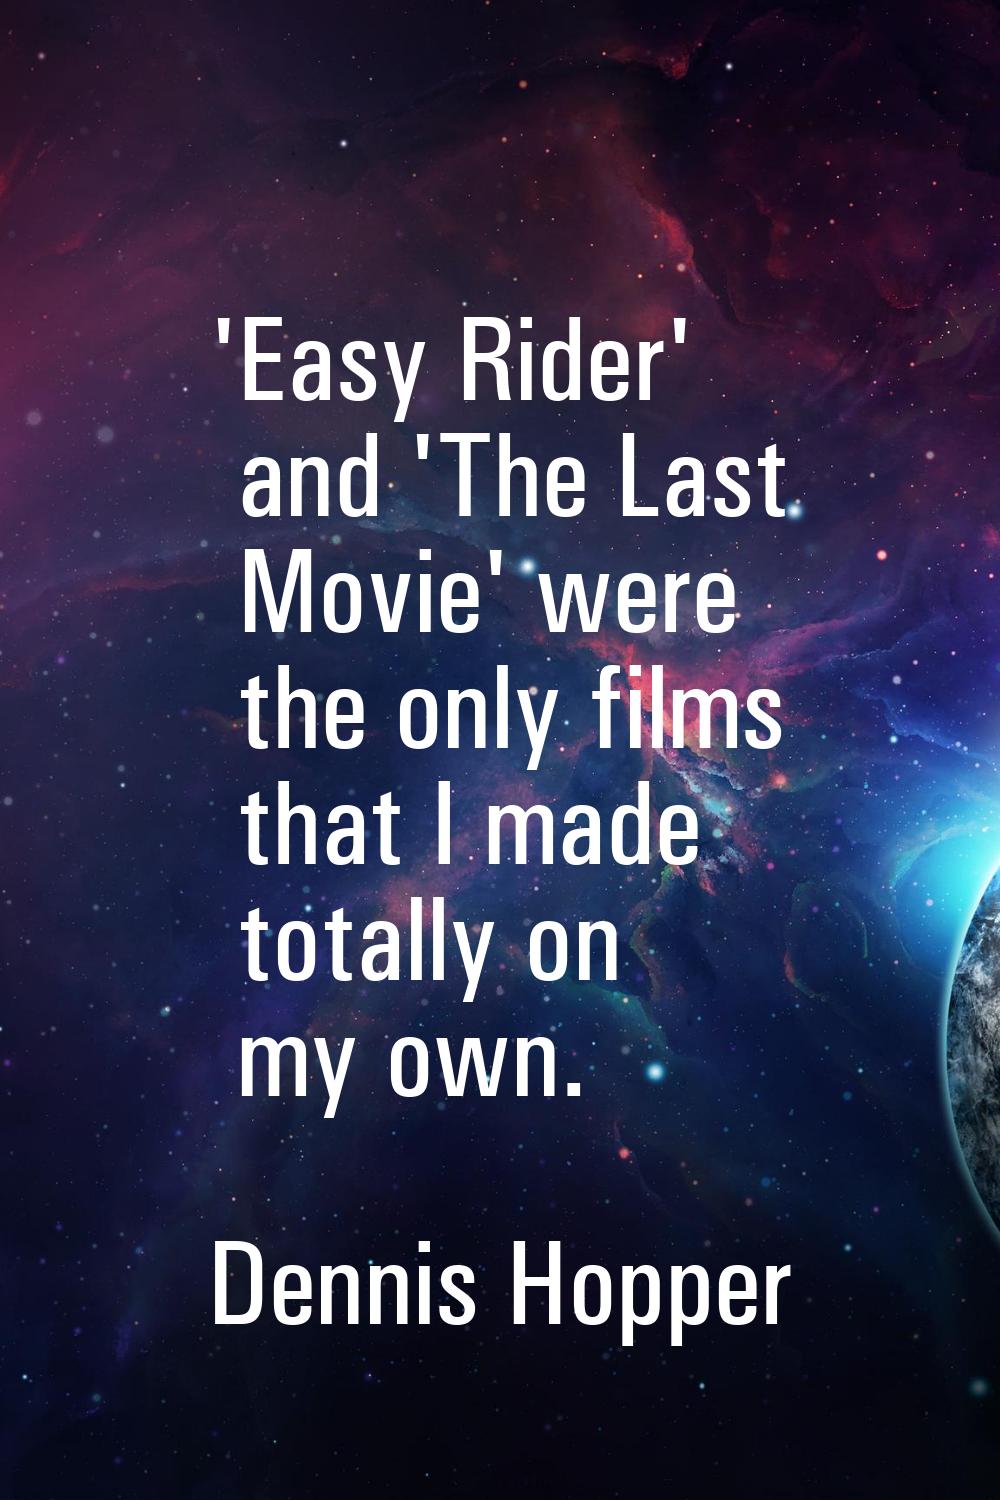 'Easy Rider' and 'The Last Movie' were the only films that I made totally on my own.